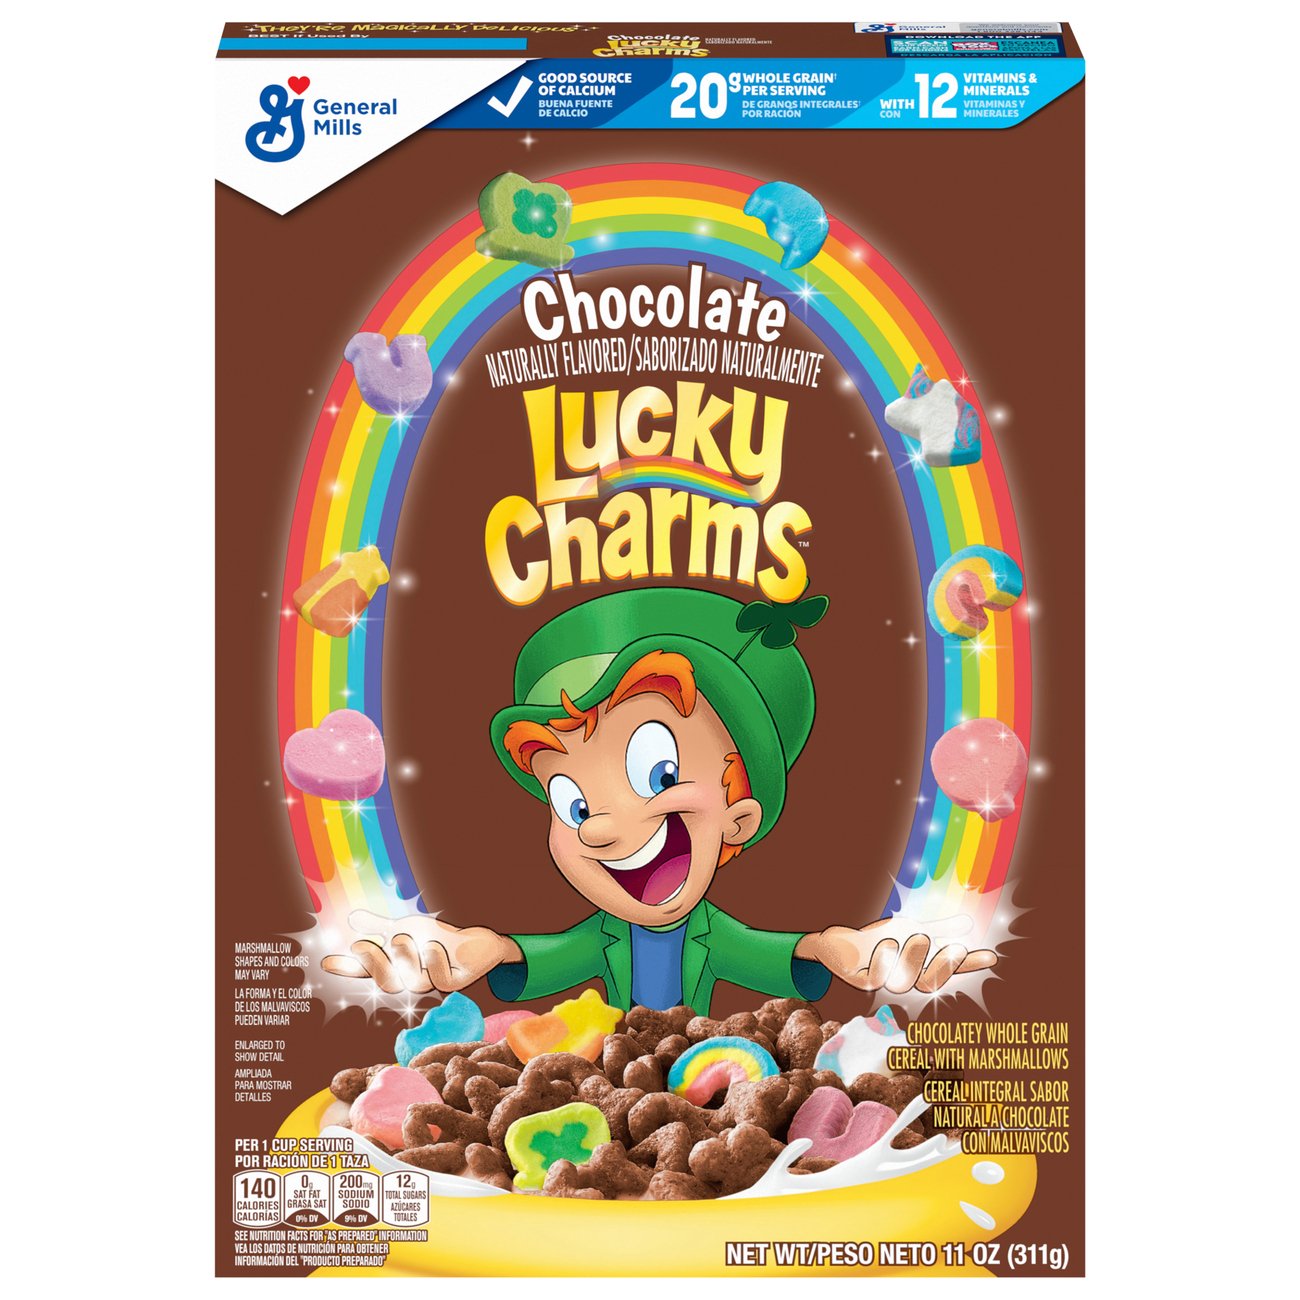 Cereal Lucky Charms Chocolate 532grs GENERAL MILLS CAJA